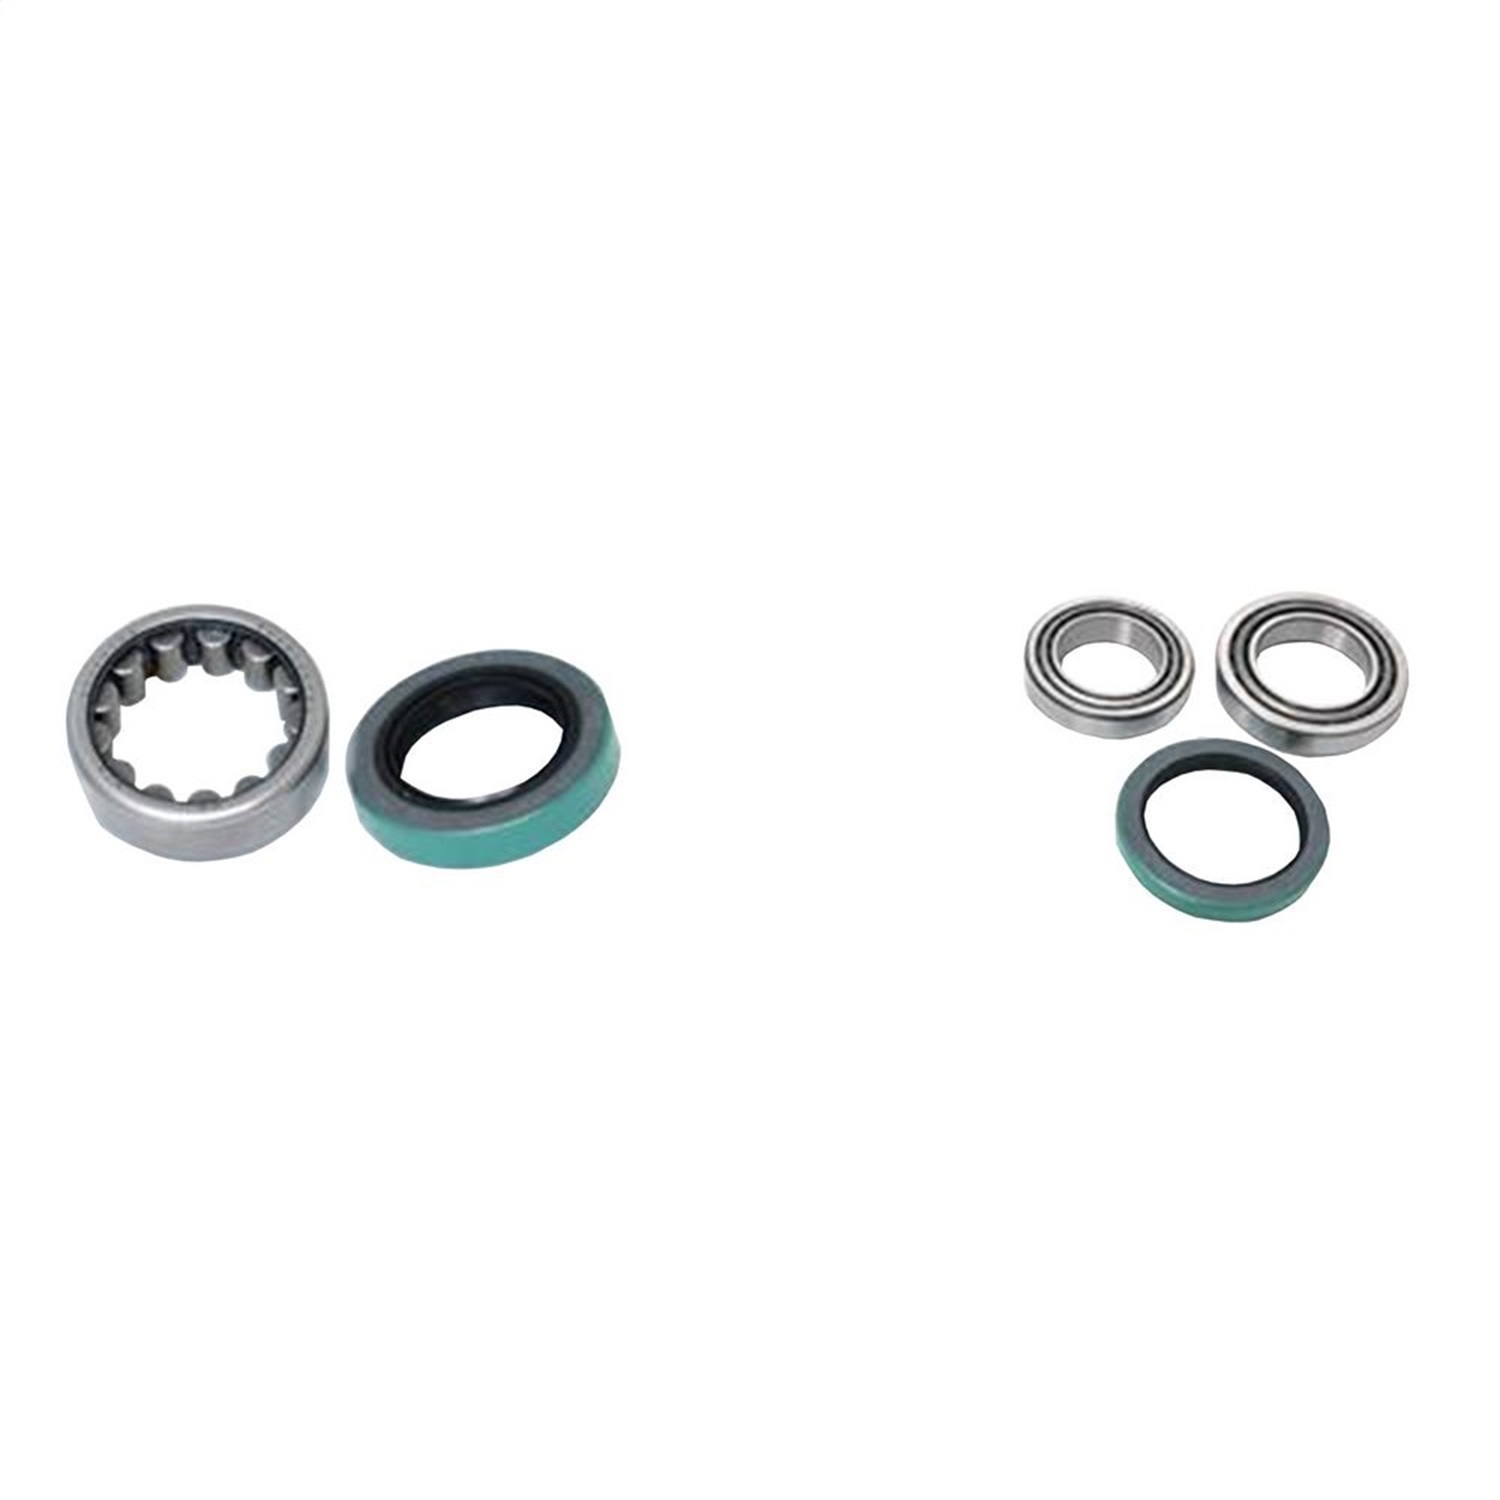 G2 Axle and Gear G2 Axle and Gear 30-8026 Wheel Bearing Kit Fits 71-77 Bronco F-150